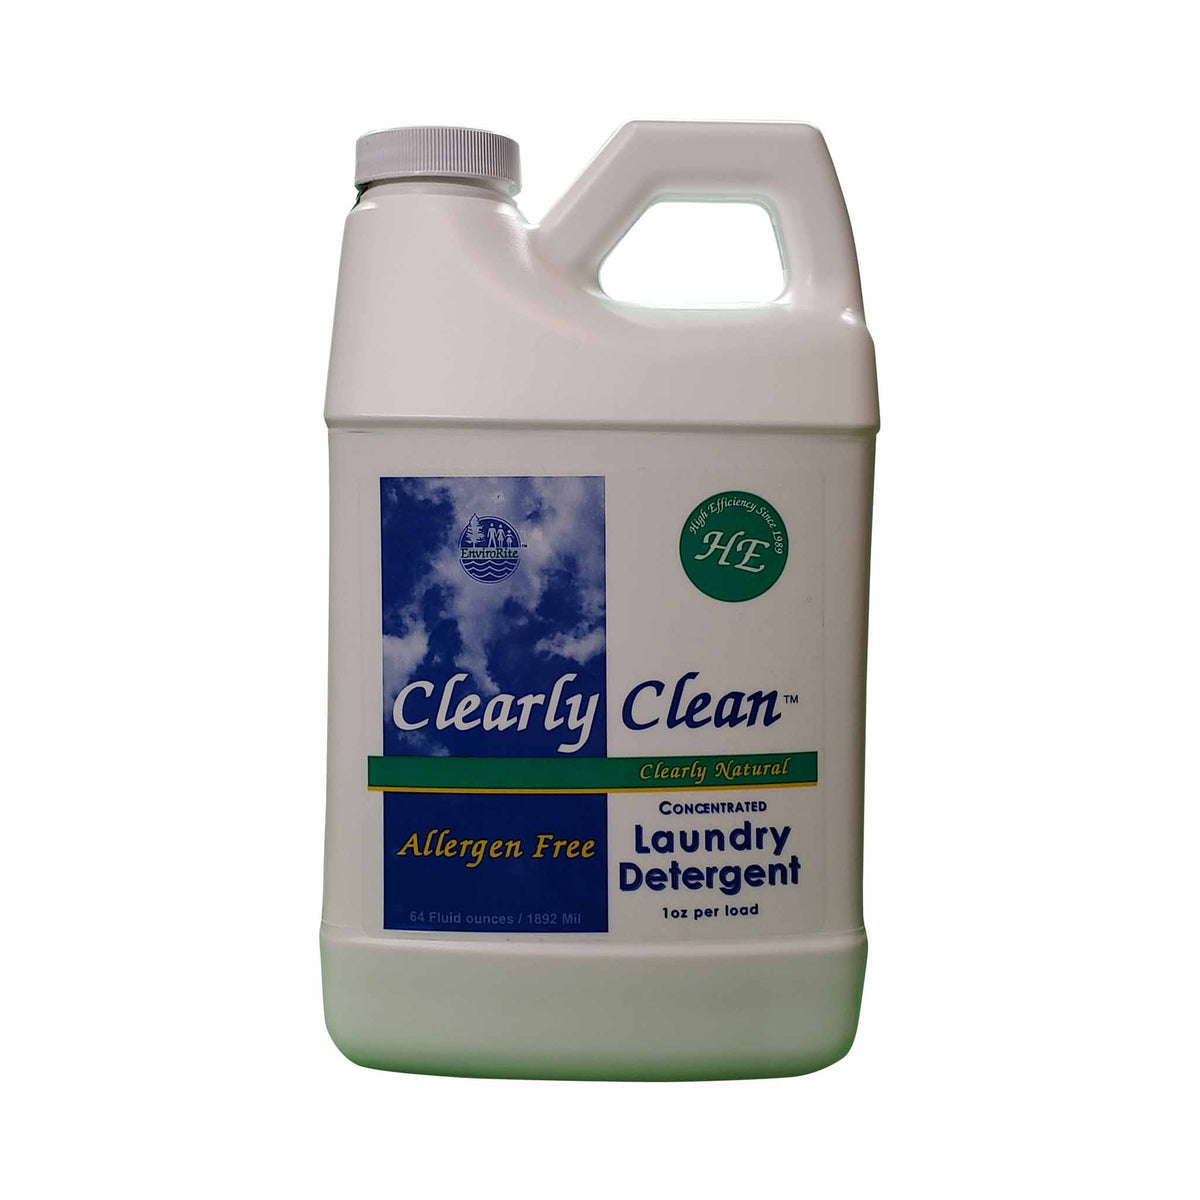 EnviroRite Clearly Clean Laundry Detergent - 64 fl.oz